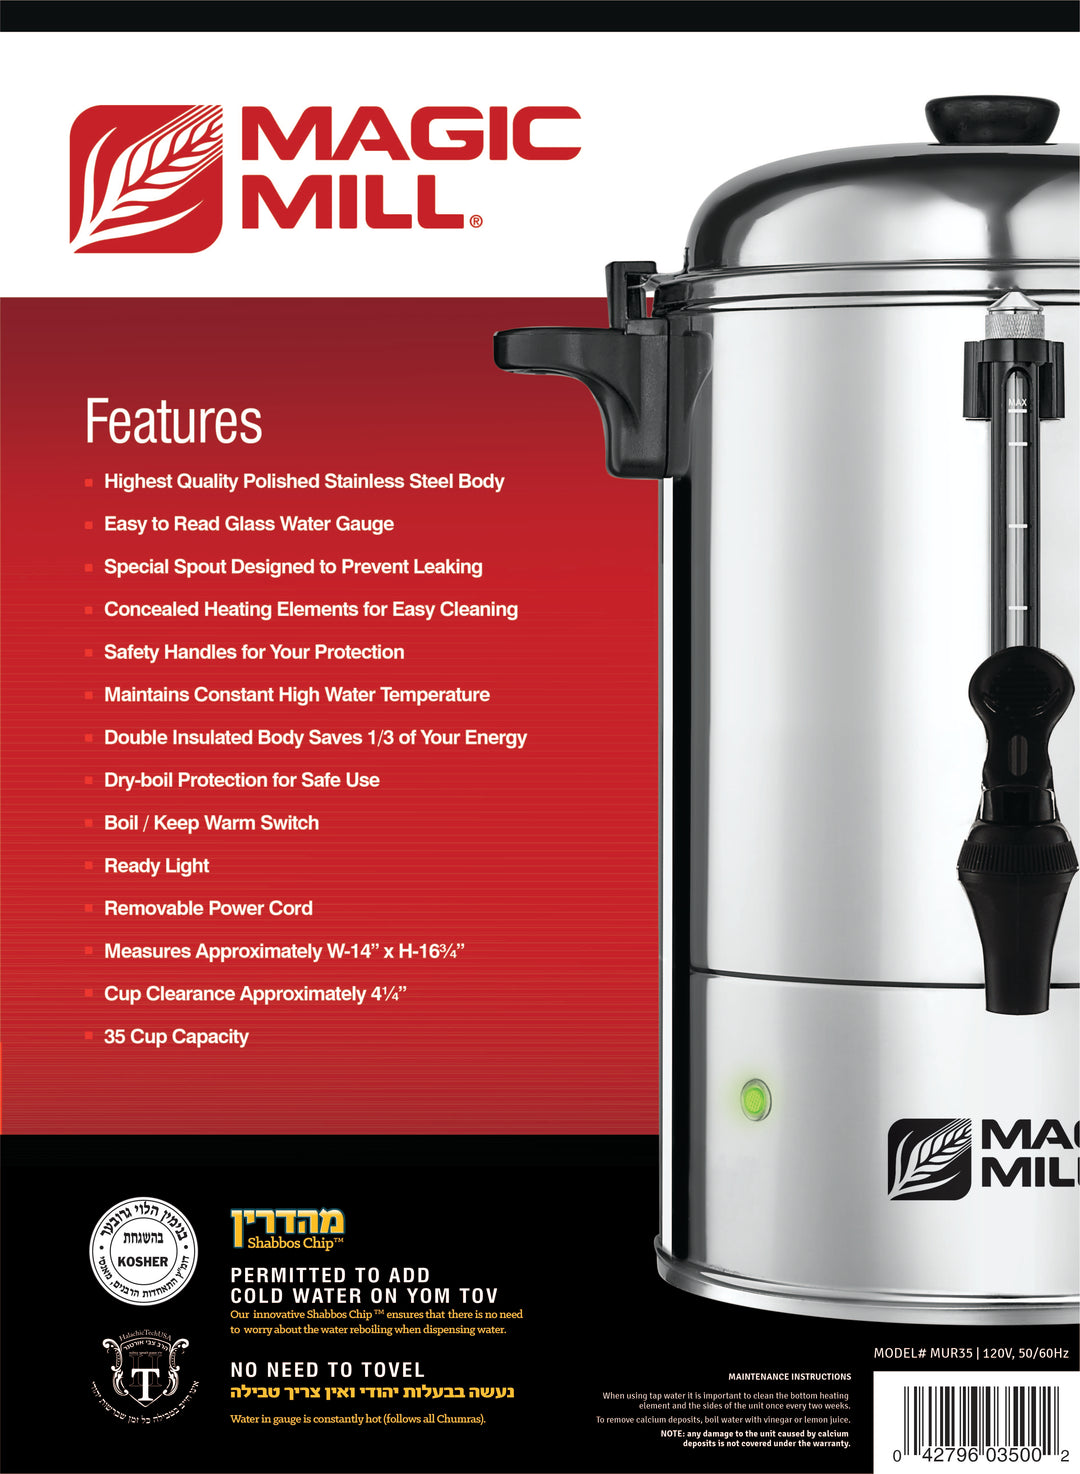 MAGIC MILL DOUBLE INSULATED HOT WATER URN 35 CUP MODEL# MUR35